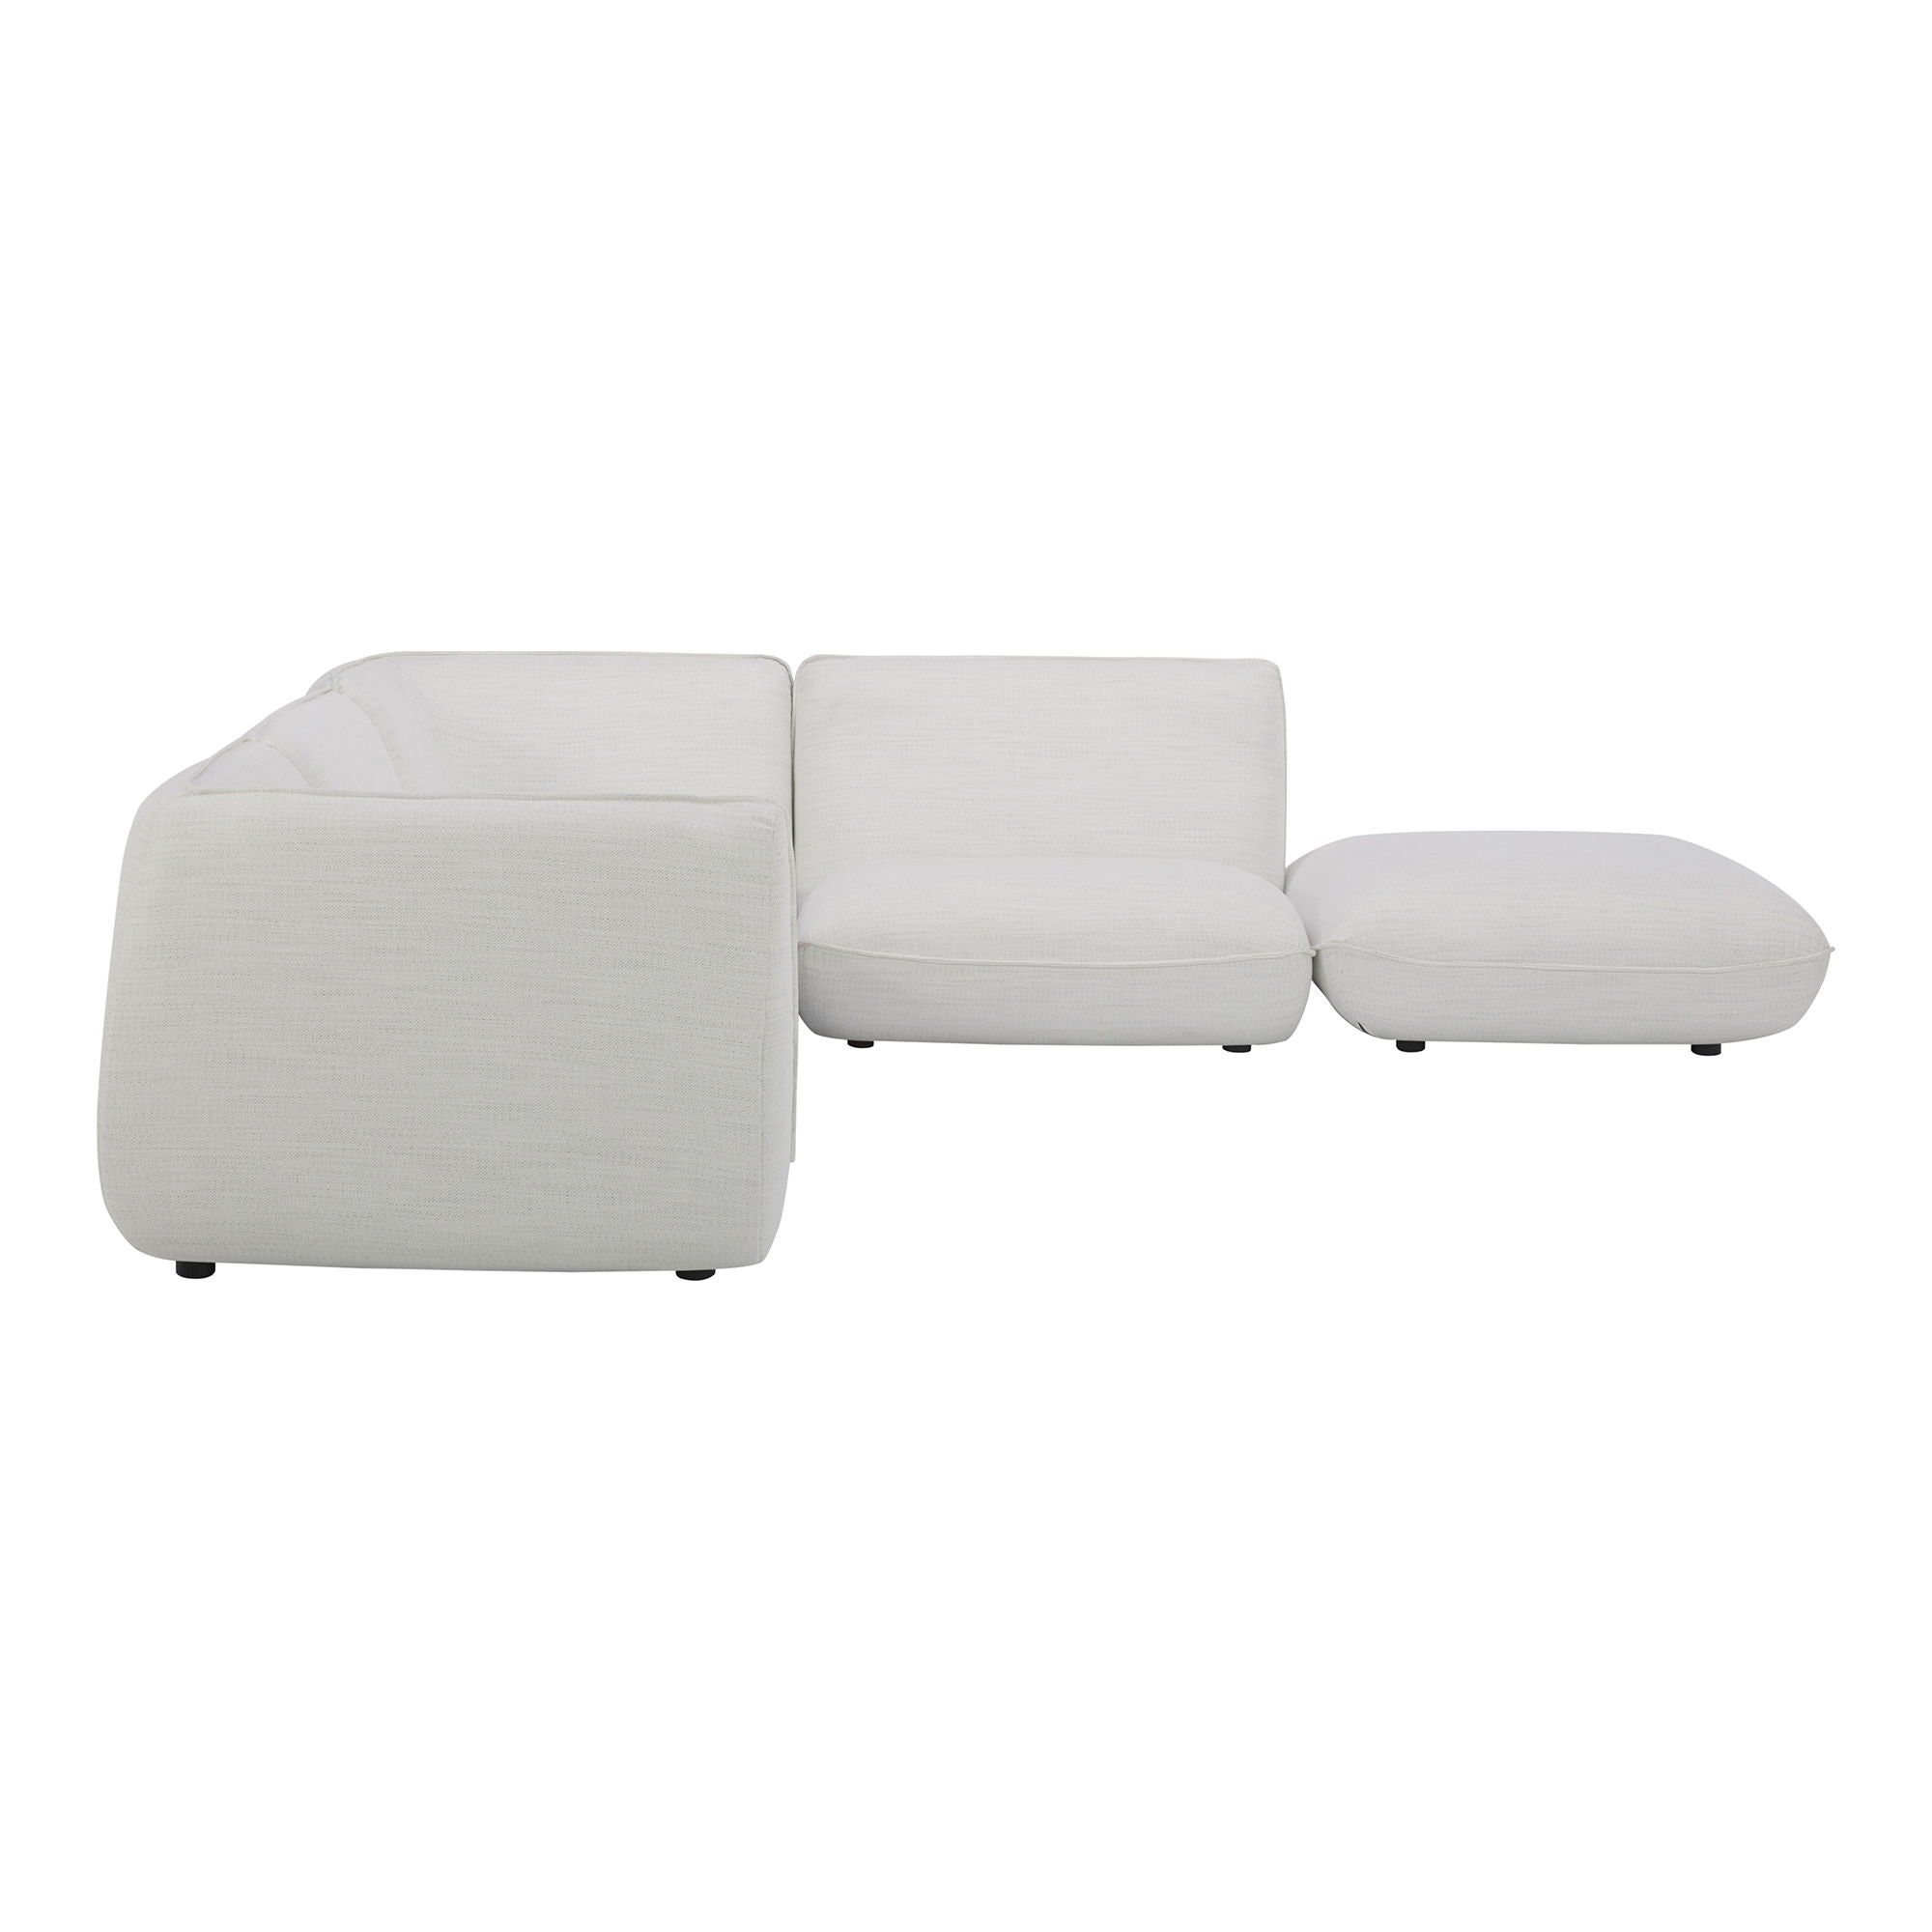 Zeppelin White Dream Modular Sectional - Cloud-Like Comfort-Stationary Sectionals-American Furniture Outlet